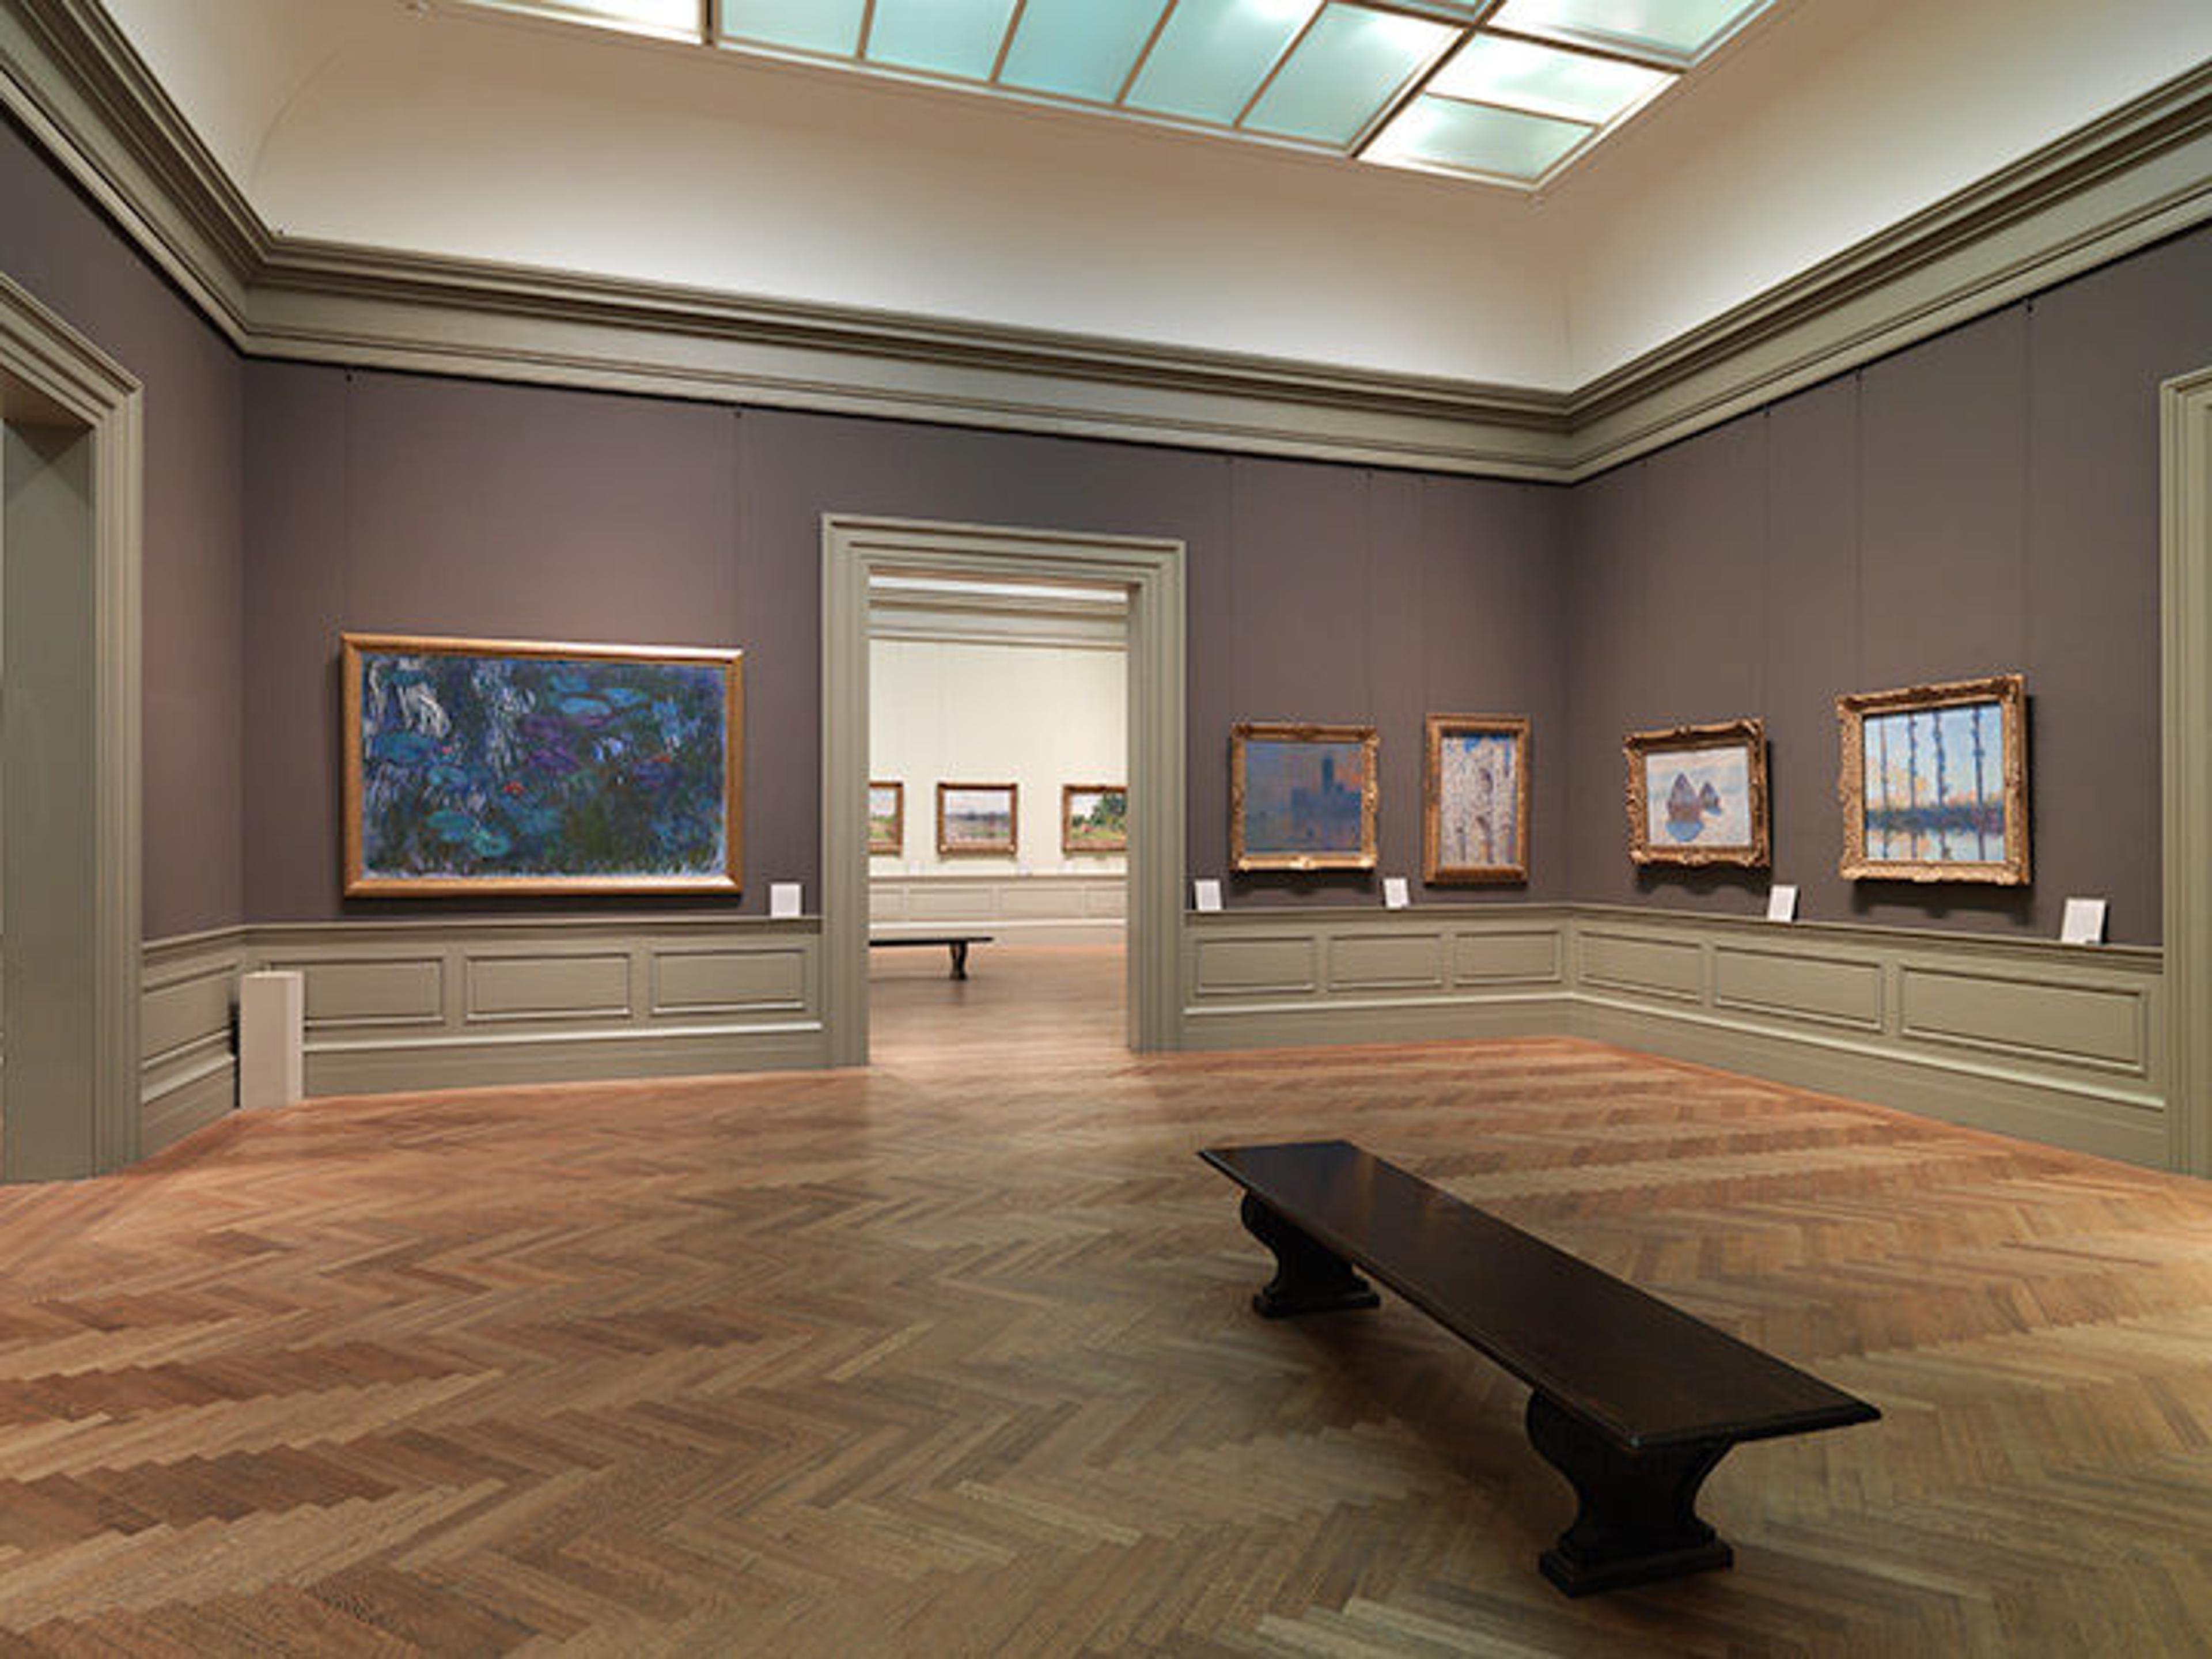 Gallery 819, with works by Claude Monet